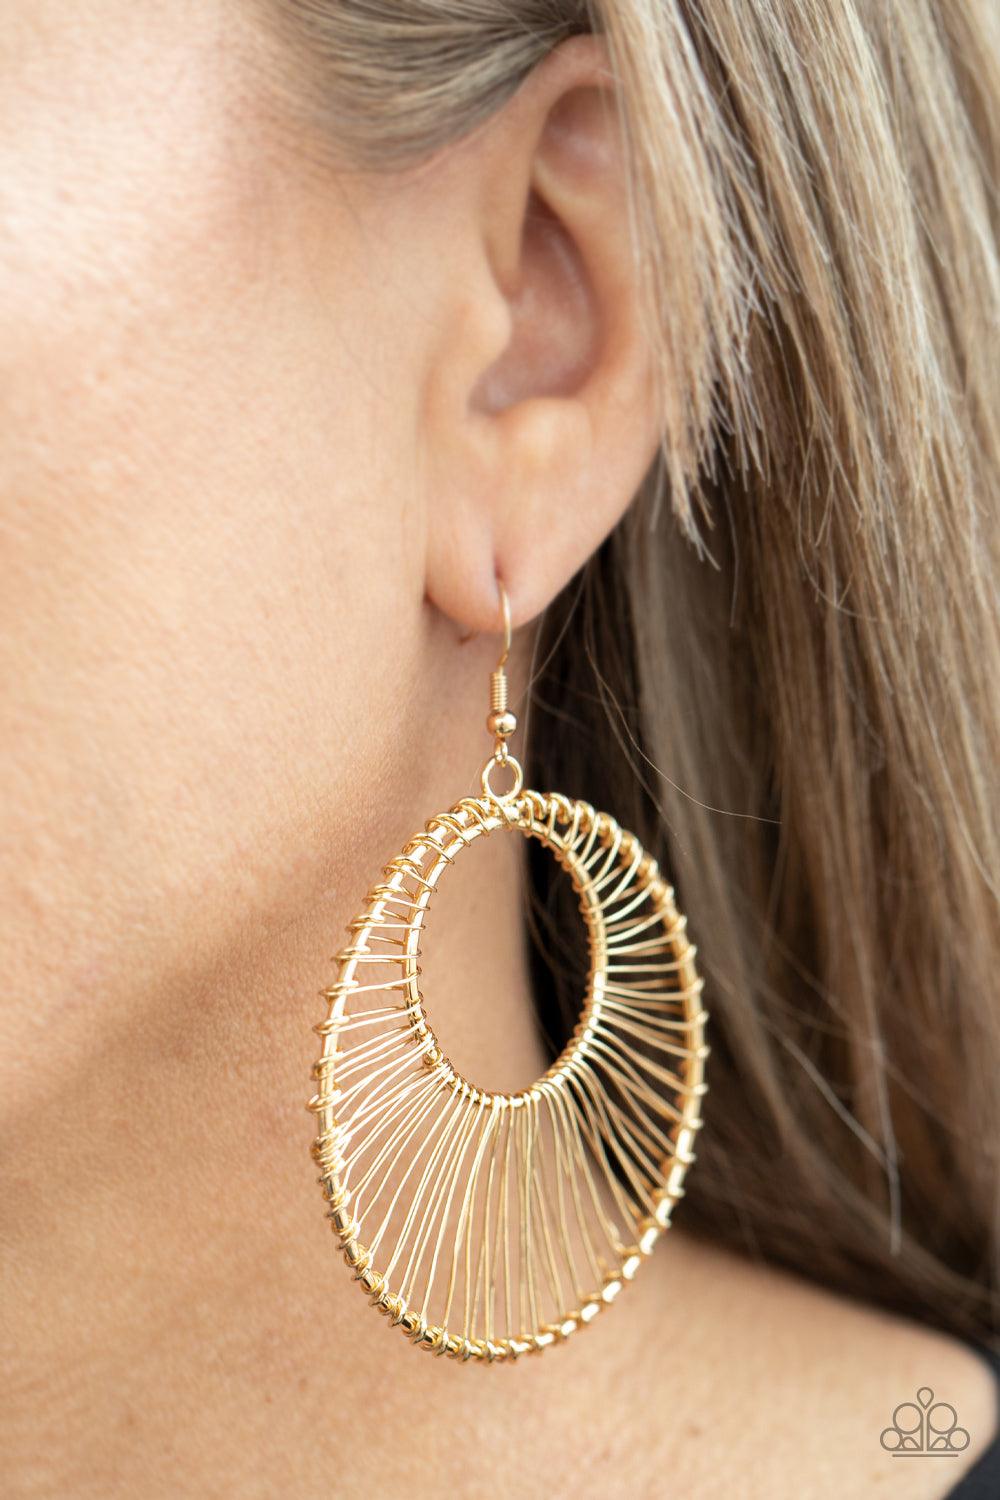 Paparazzi Accessories Artisan Applique - Gold Glistening gold wire wraps around two gold hoops, creating an airy crescent shaped frame for an artisan inspired fashion. Earring attaches to a standard fishhook fitting. Sold as one pair of earrings. Jewelry